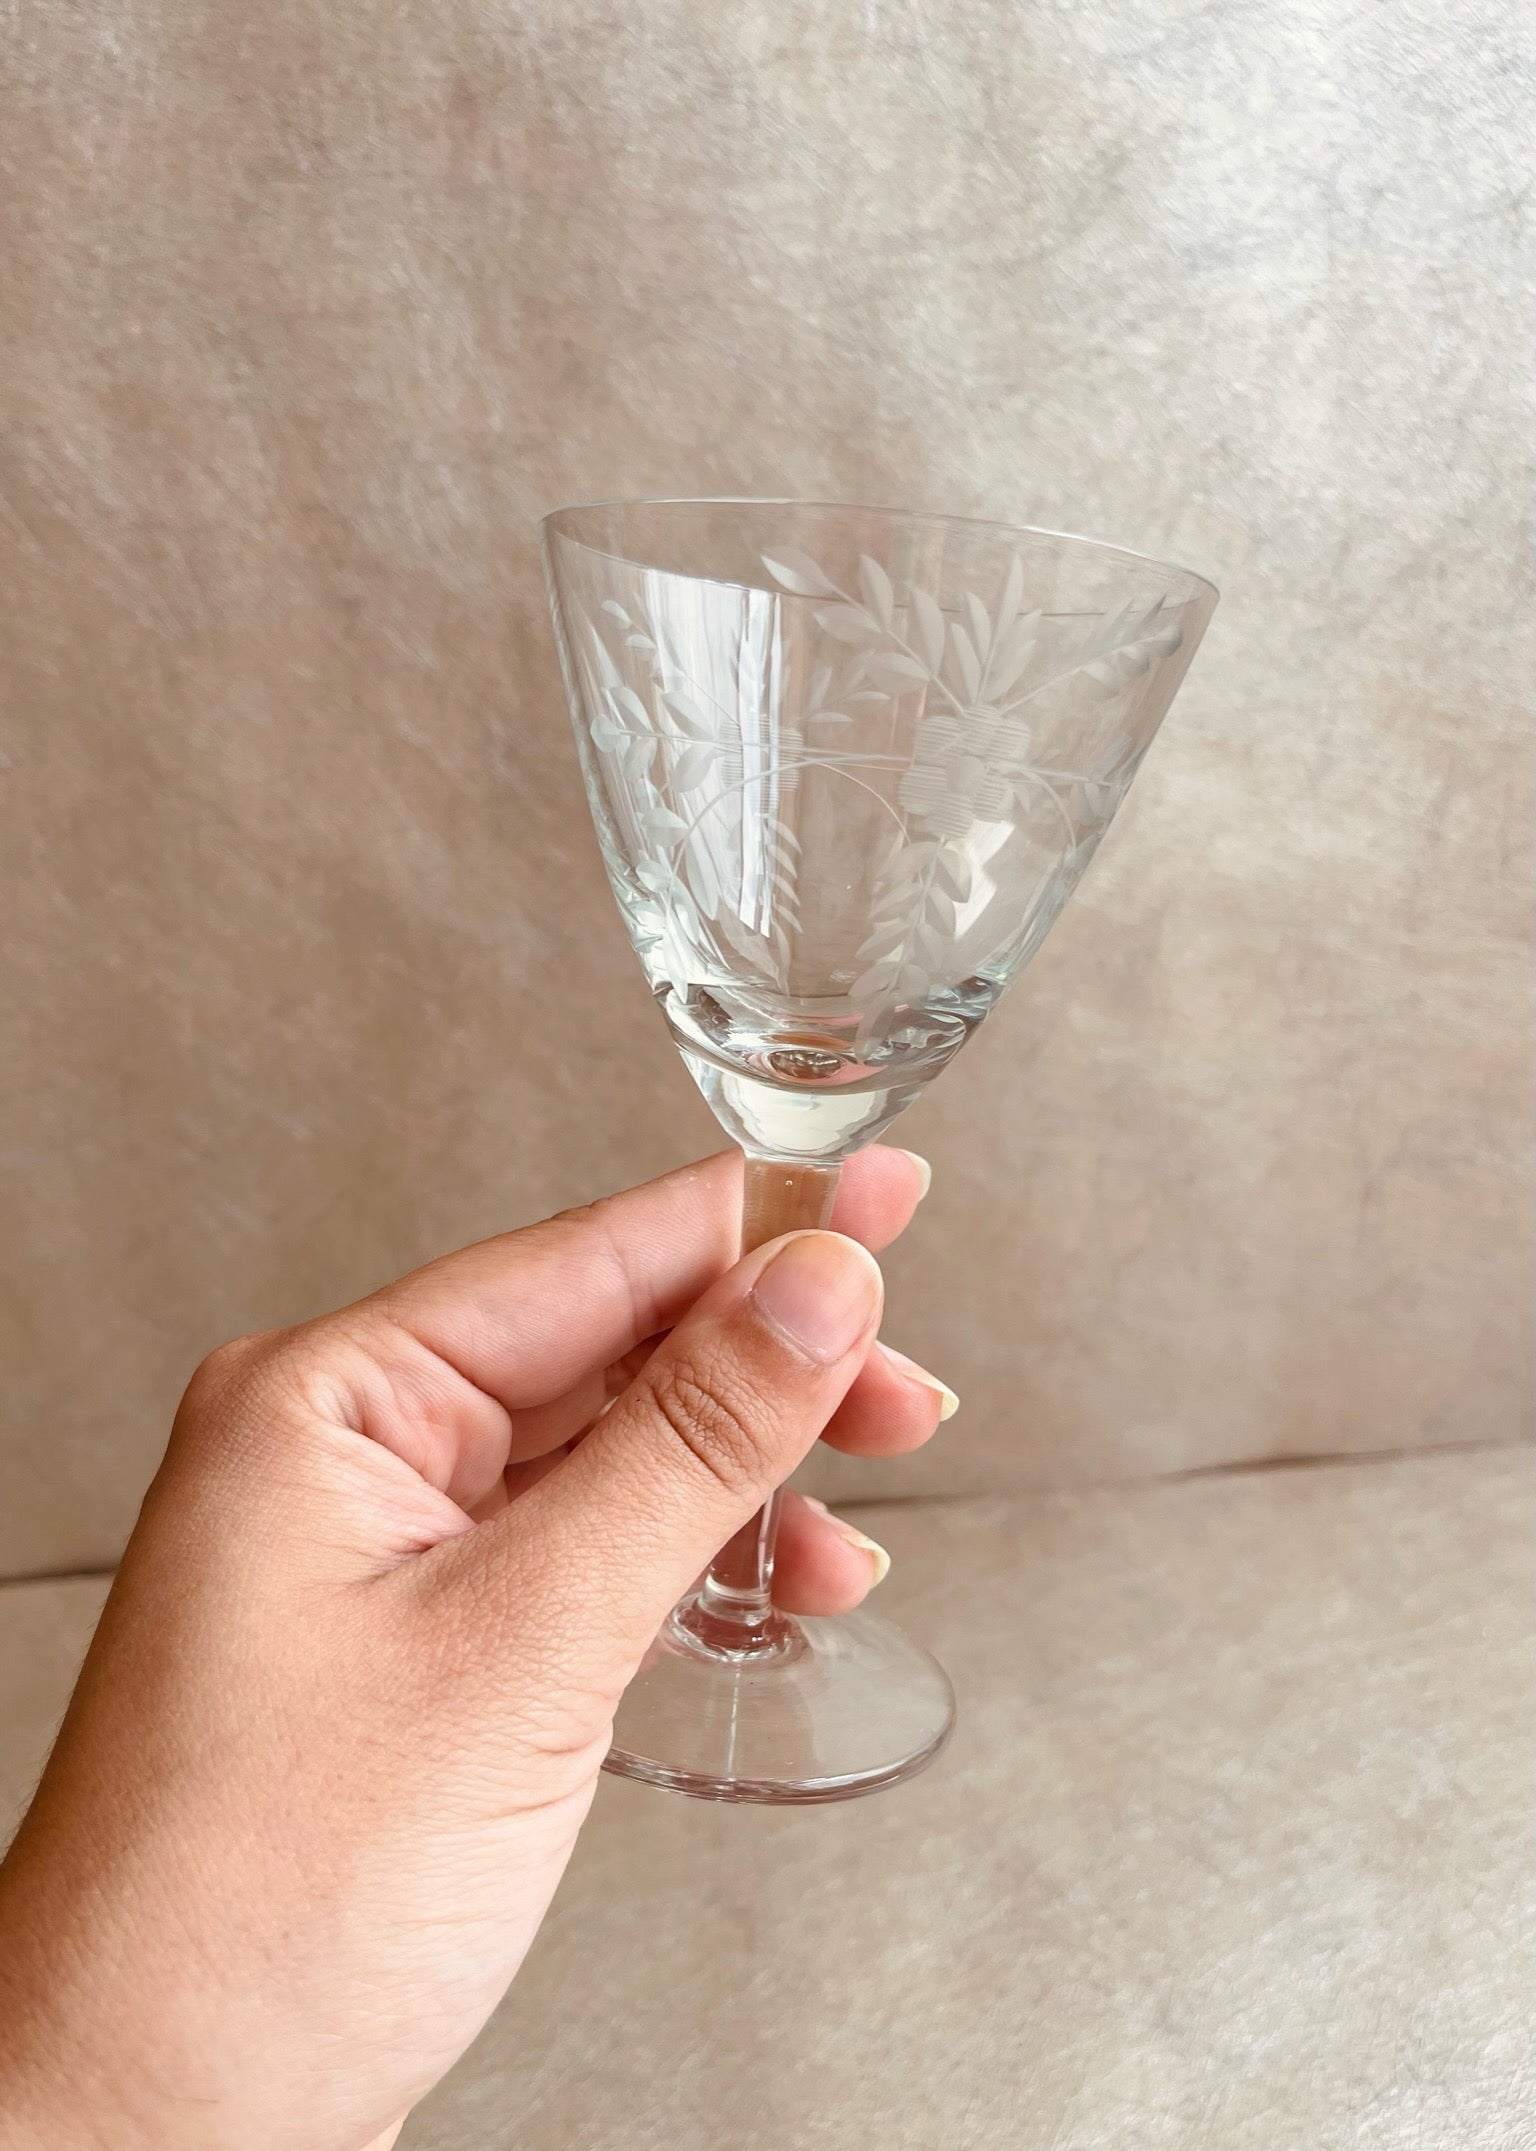 Crystal Floral Etched Cordial Glasses